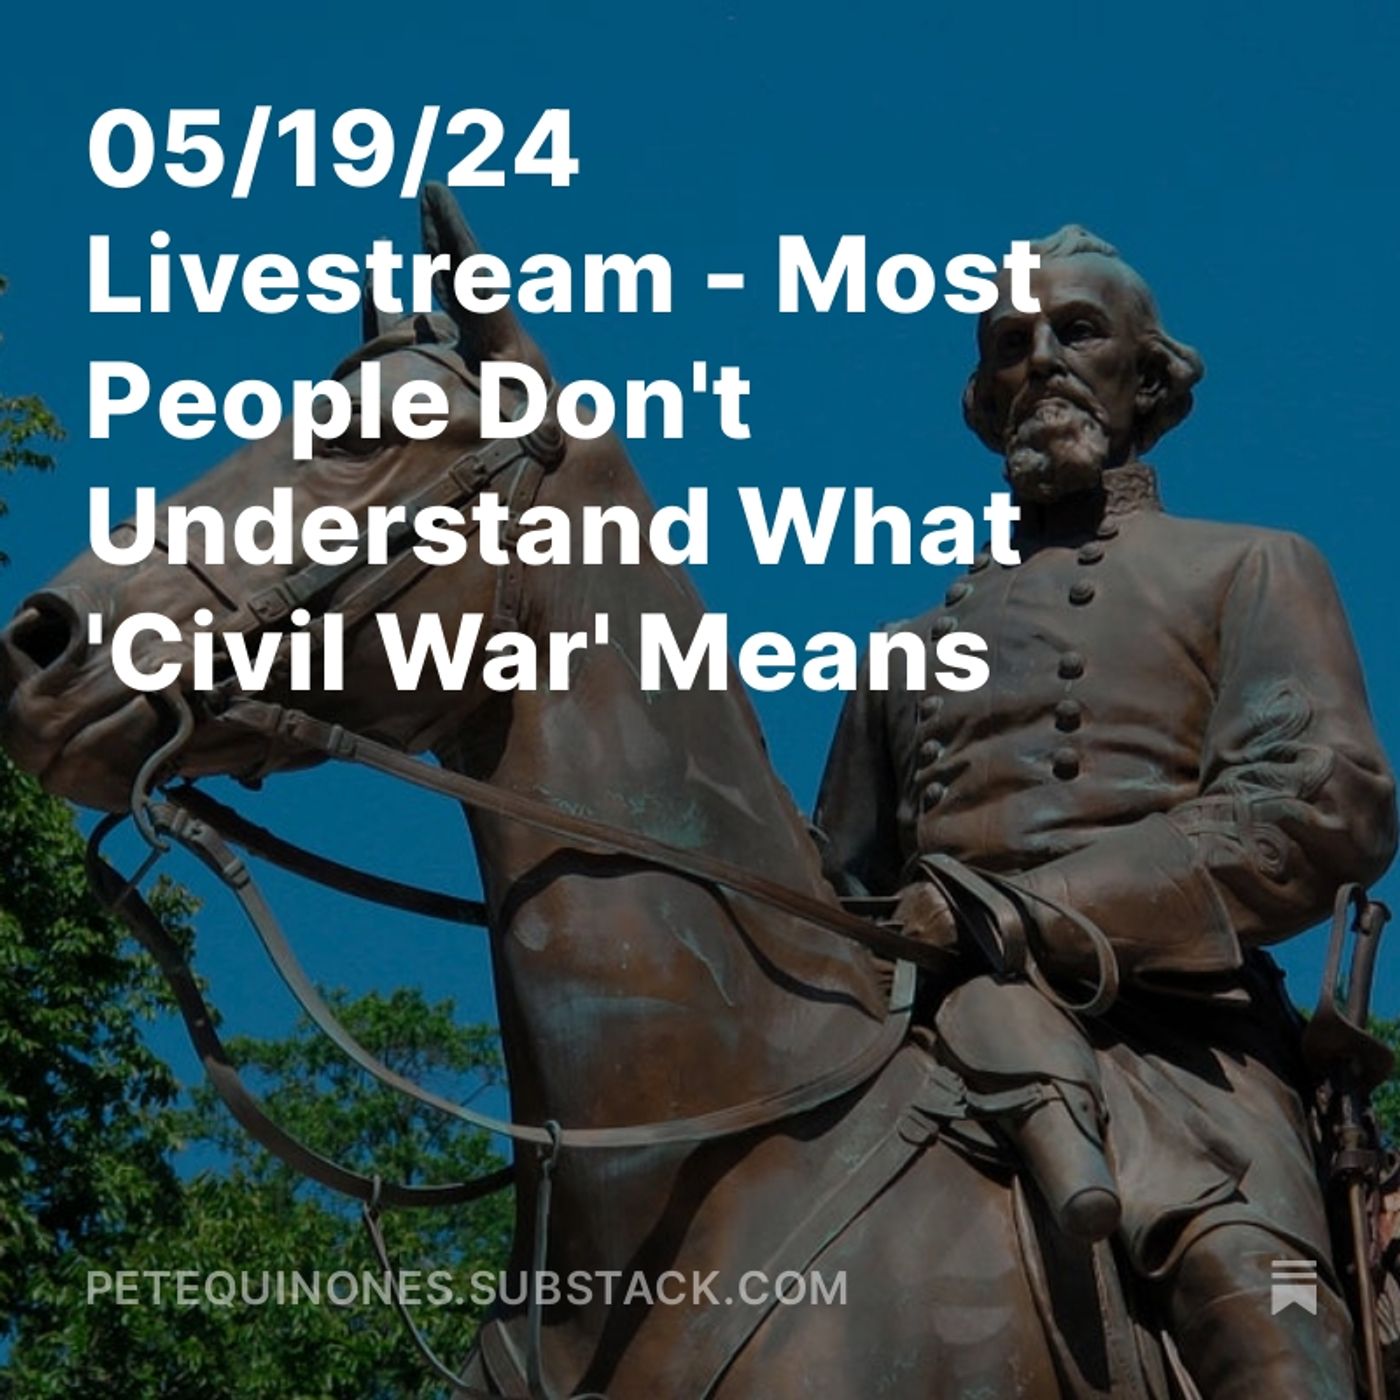 05/19/24 Livestream - Most People Don't Understand What 'Civil War' Means